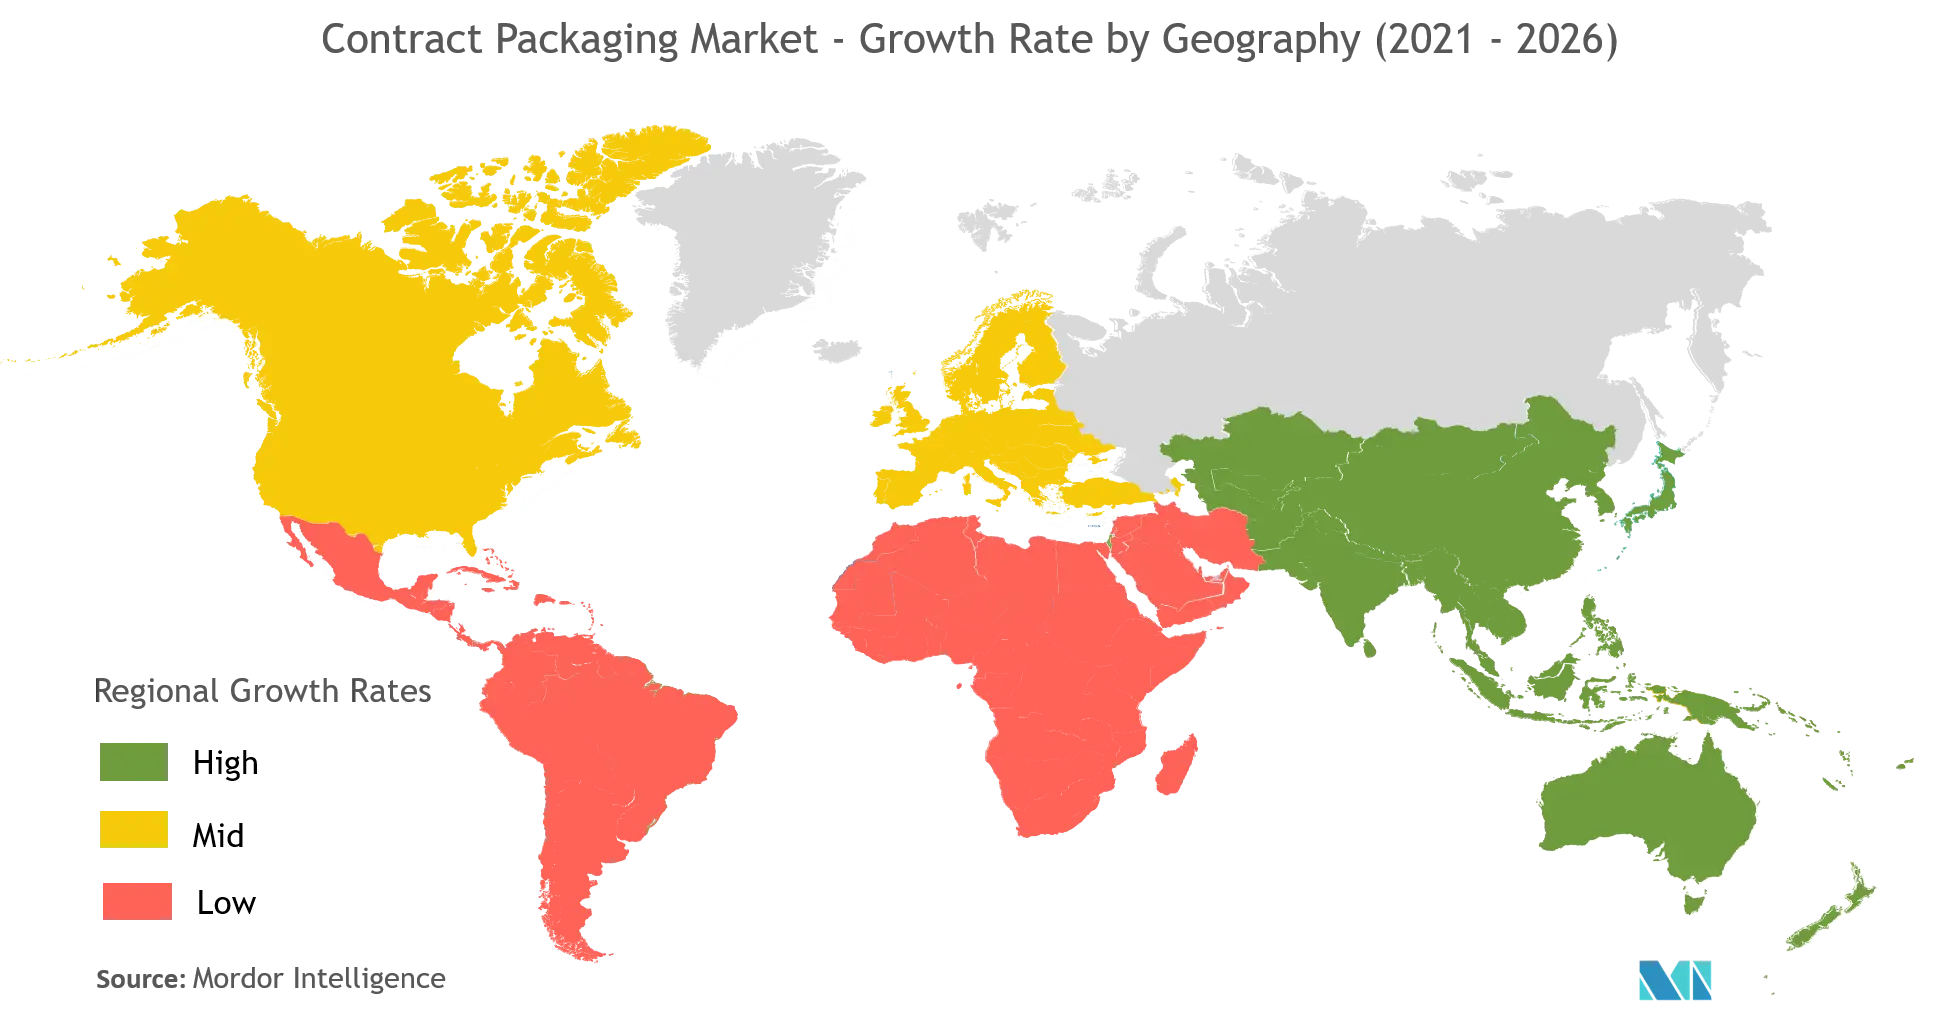  Contract packaging market Growth by Region